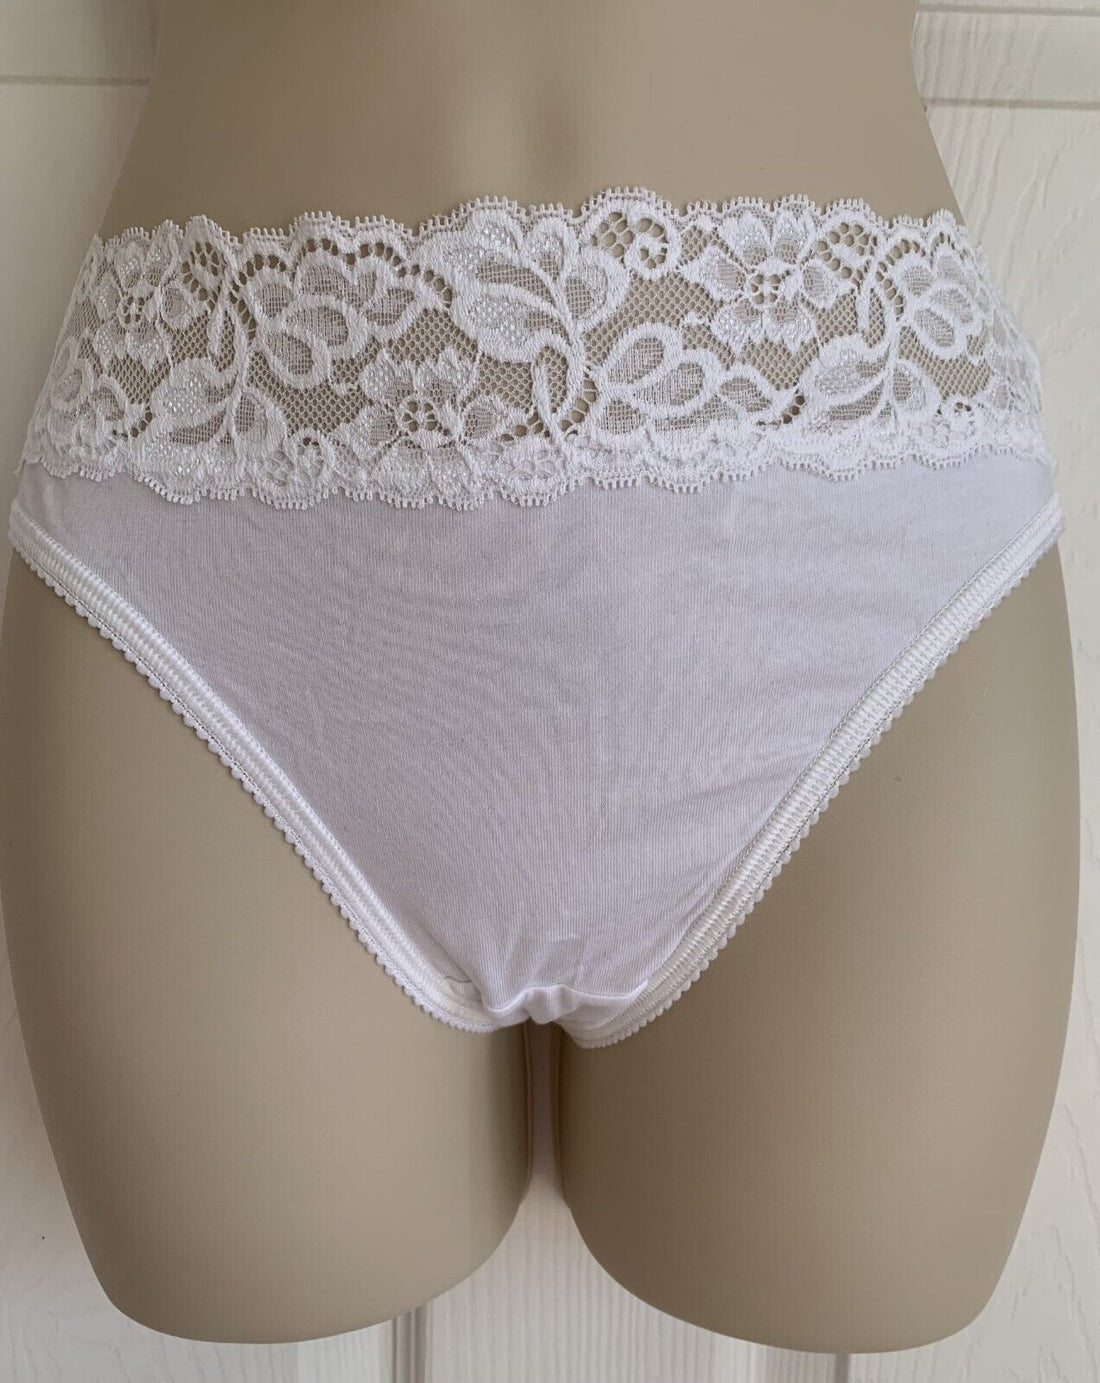 EX M*S White Cotton Rich Embroidery Lace Trim High Leg Knickers Size 10-22